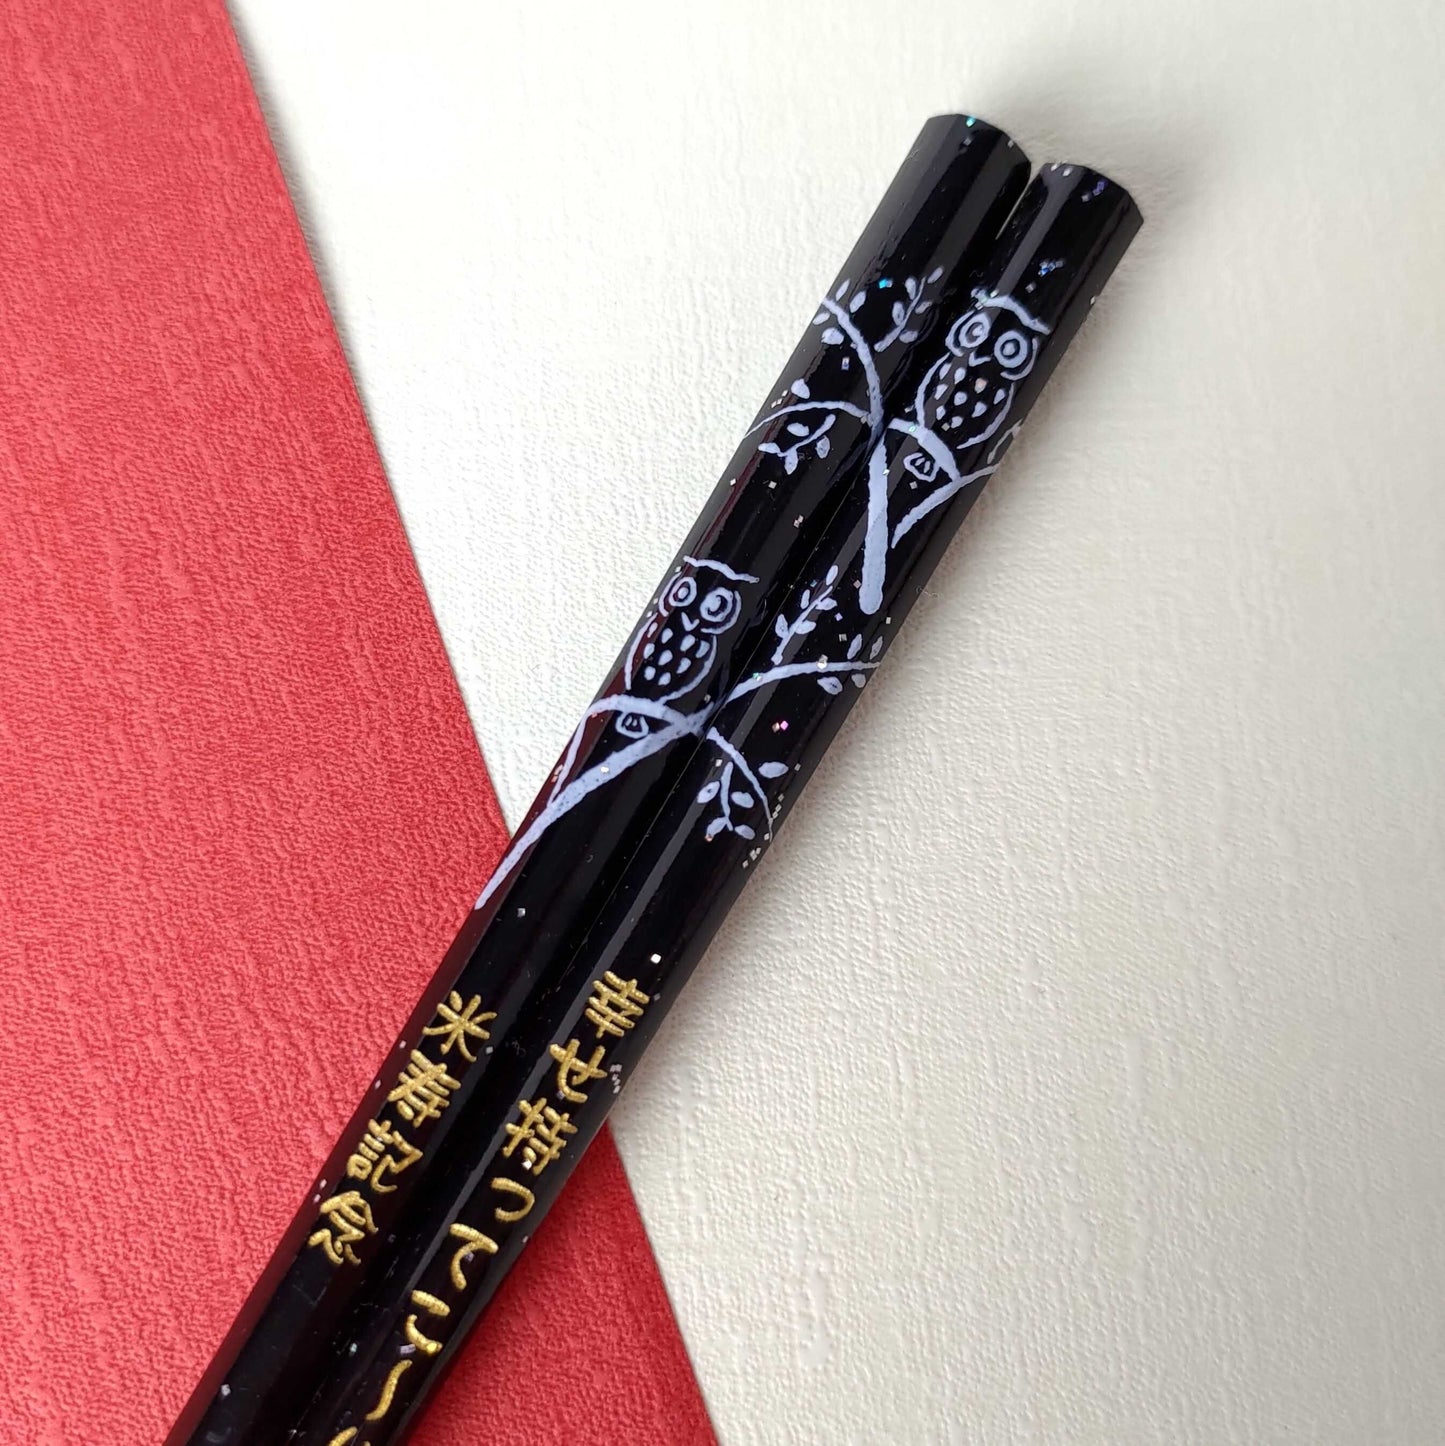 Elegant Japanese chopsticks crowned with owl black red - SINGLE PAIR WITH ENGRAVED WOODEN BOX SET